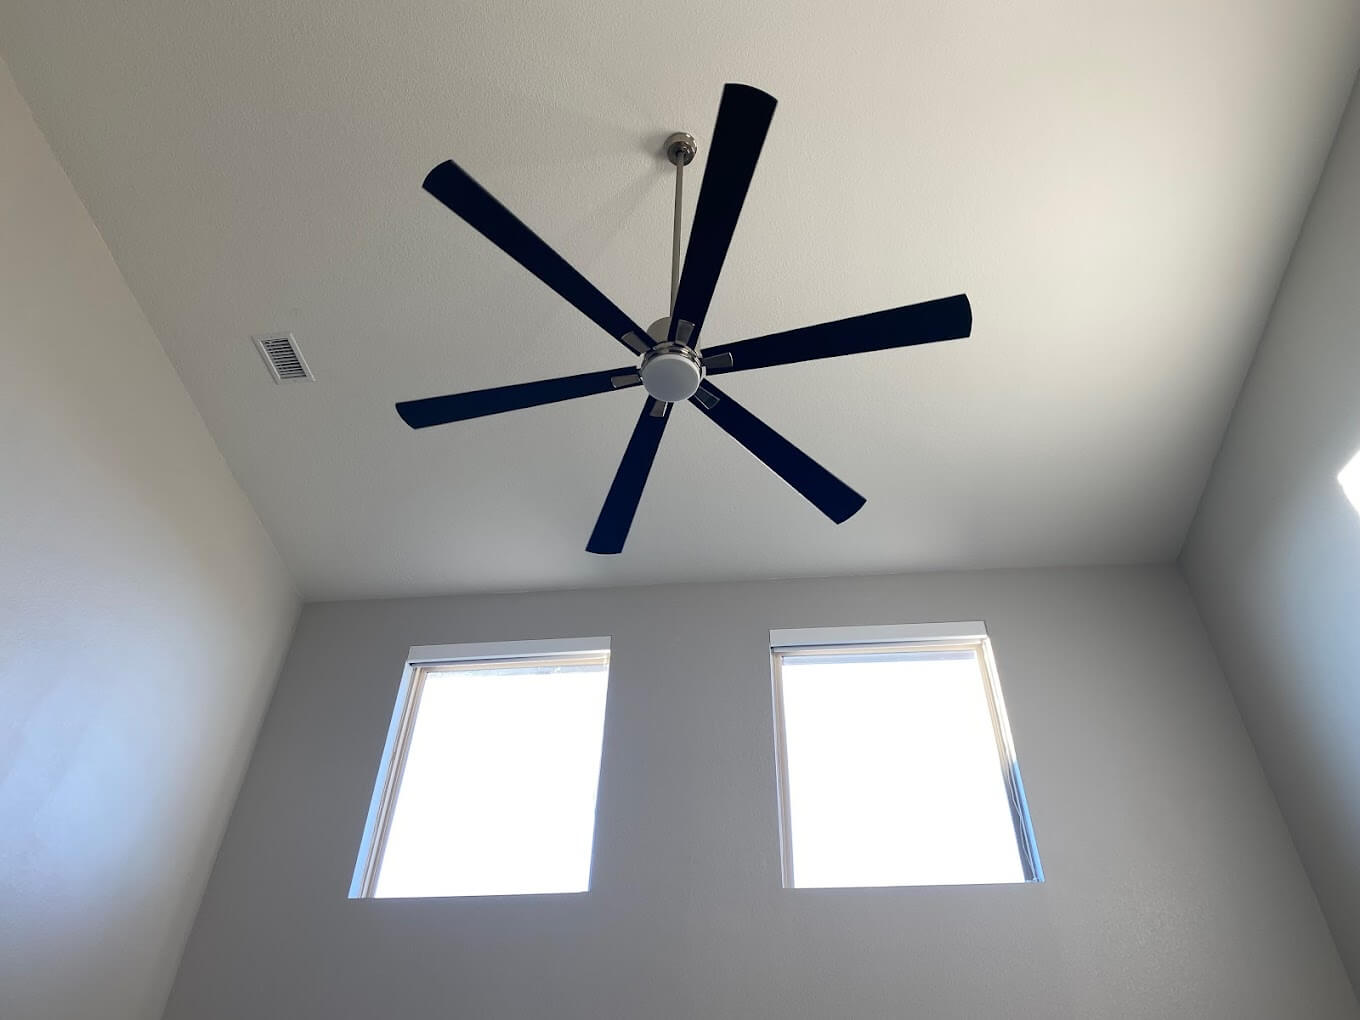 Electrical Services fan repair